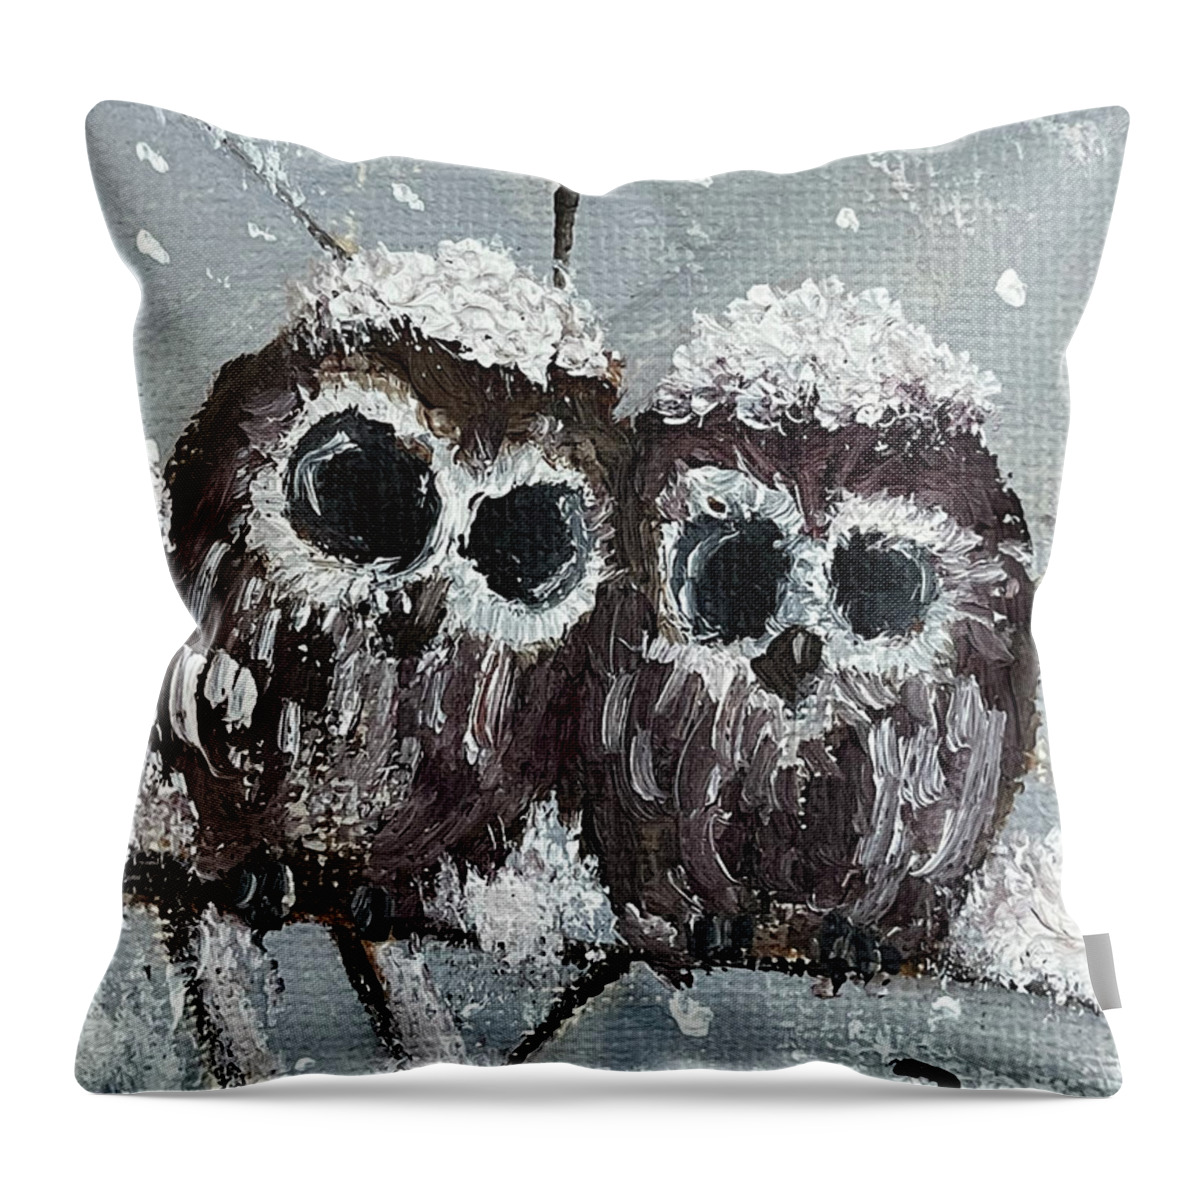 Owls. Baby Owls Throw Pillow featuring the painting Owl Chicks in the Snow by Roxy Rich